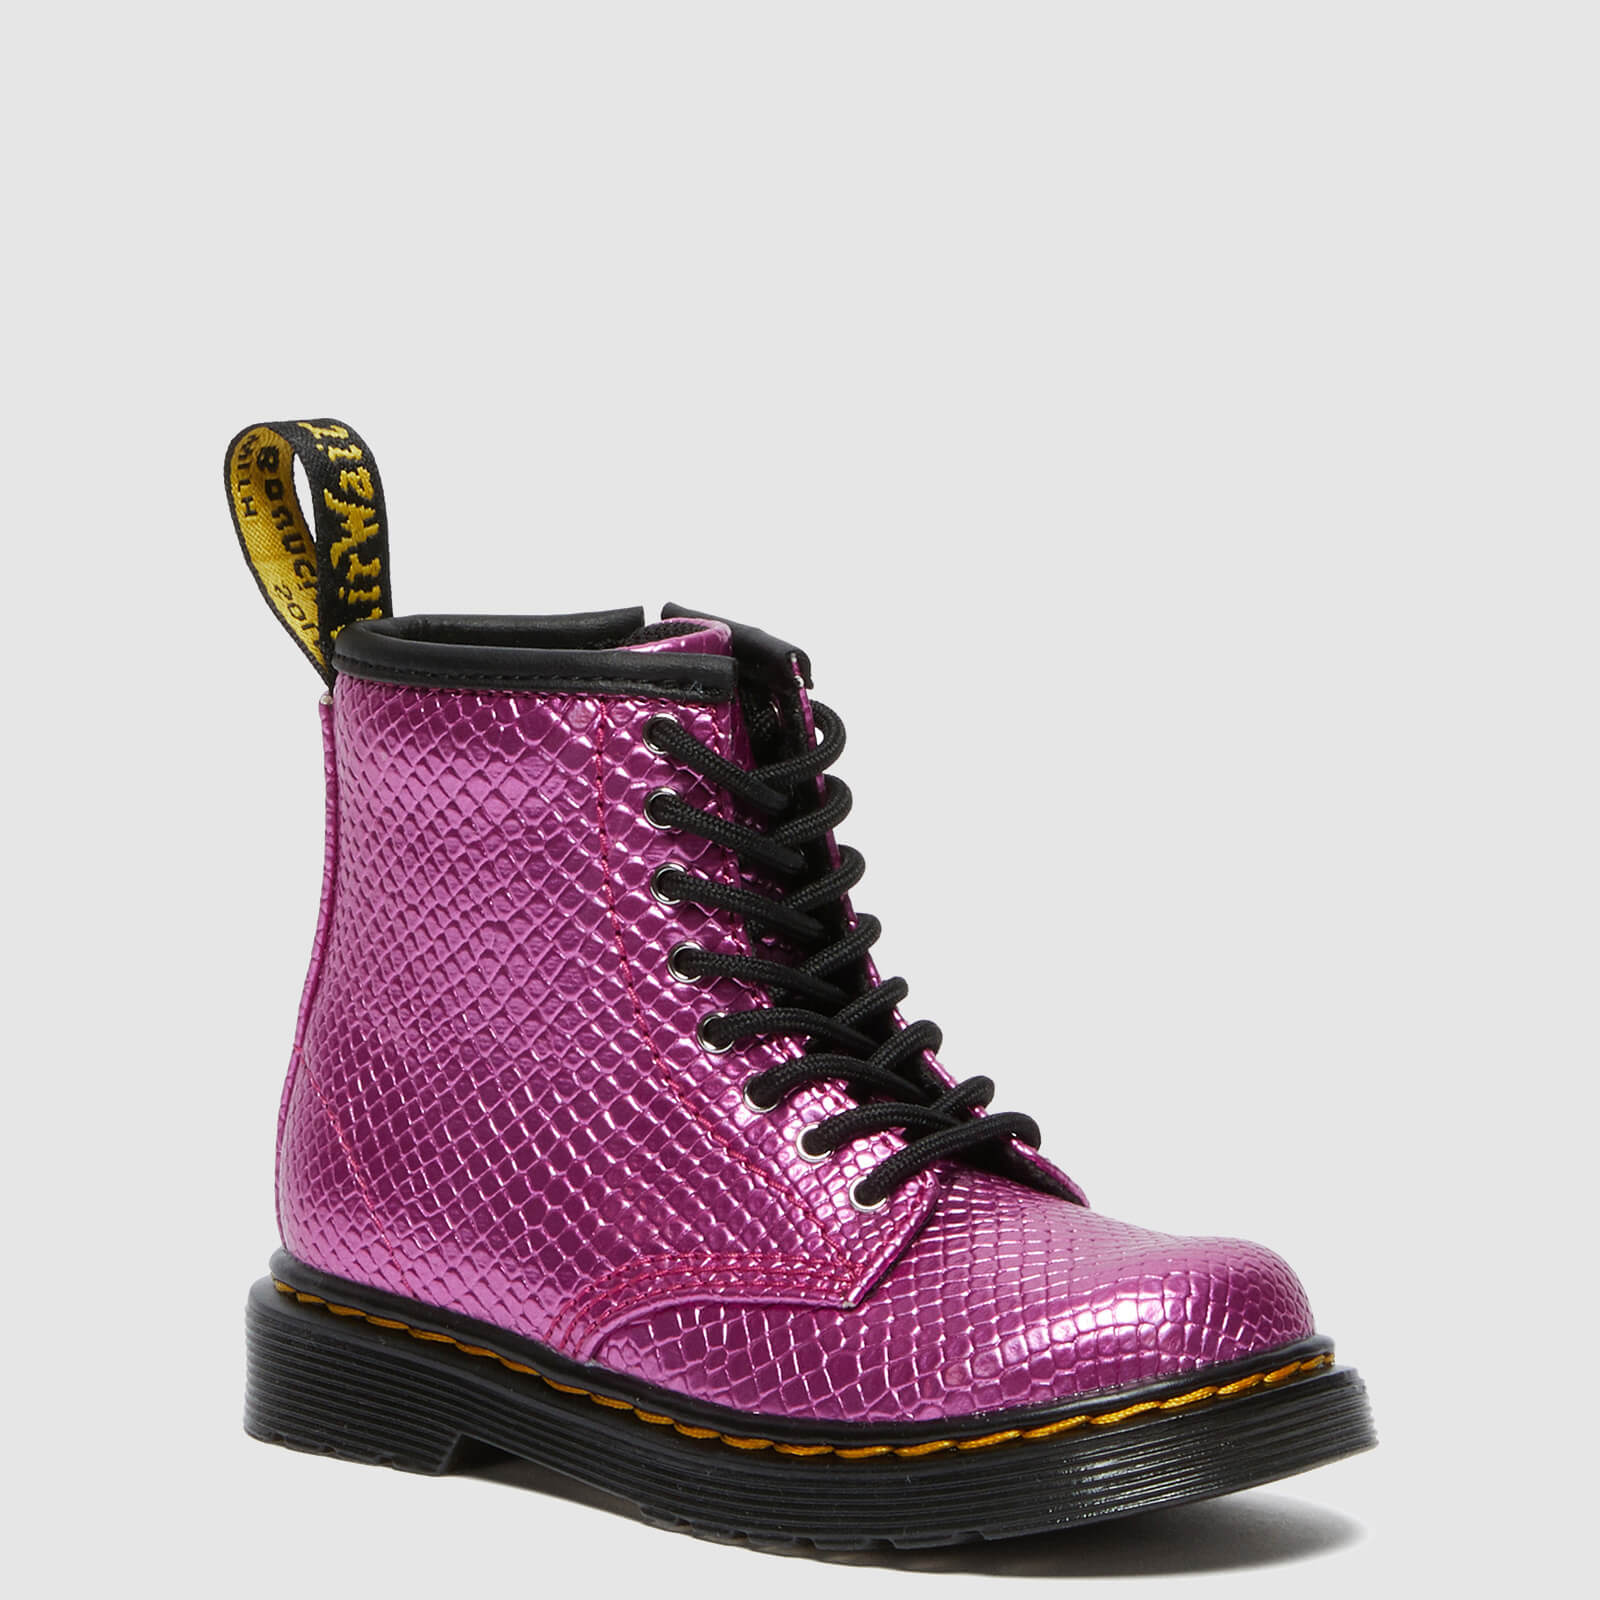 Dr. Martens Toddlers' 1460 Patent Lamper Lace Up Boots - Pink Reptile Emboss - UK 6 Toddler